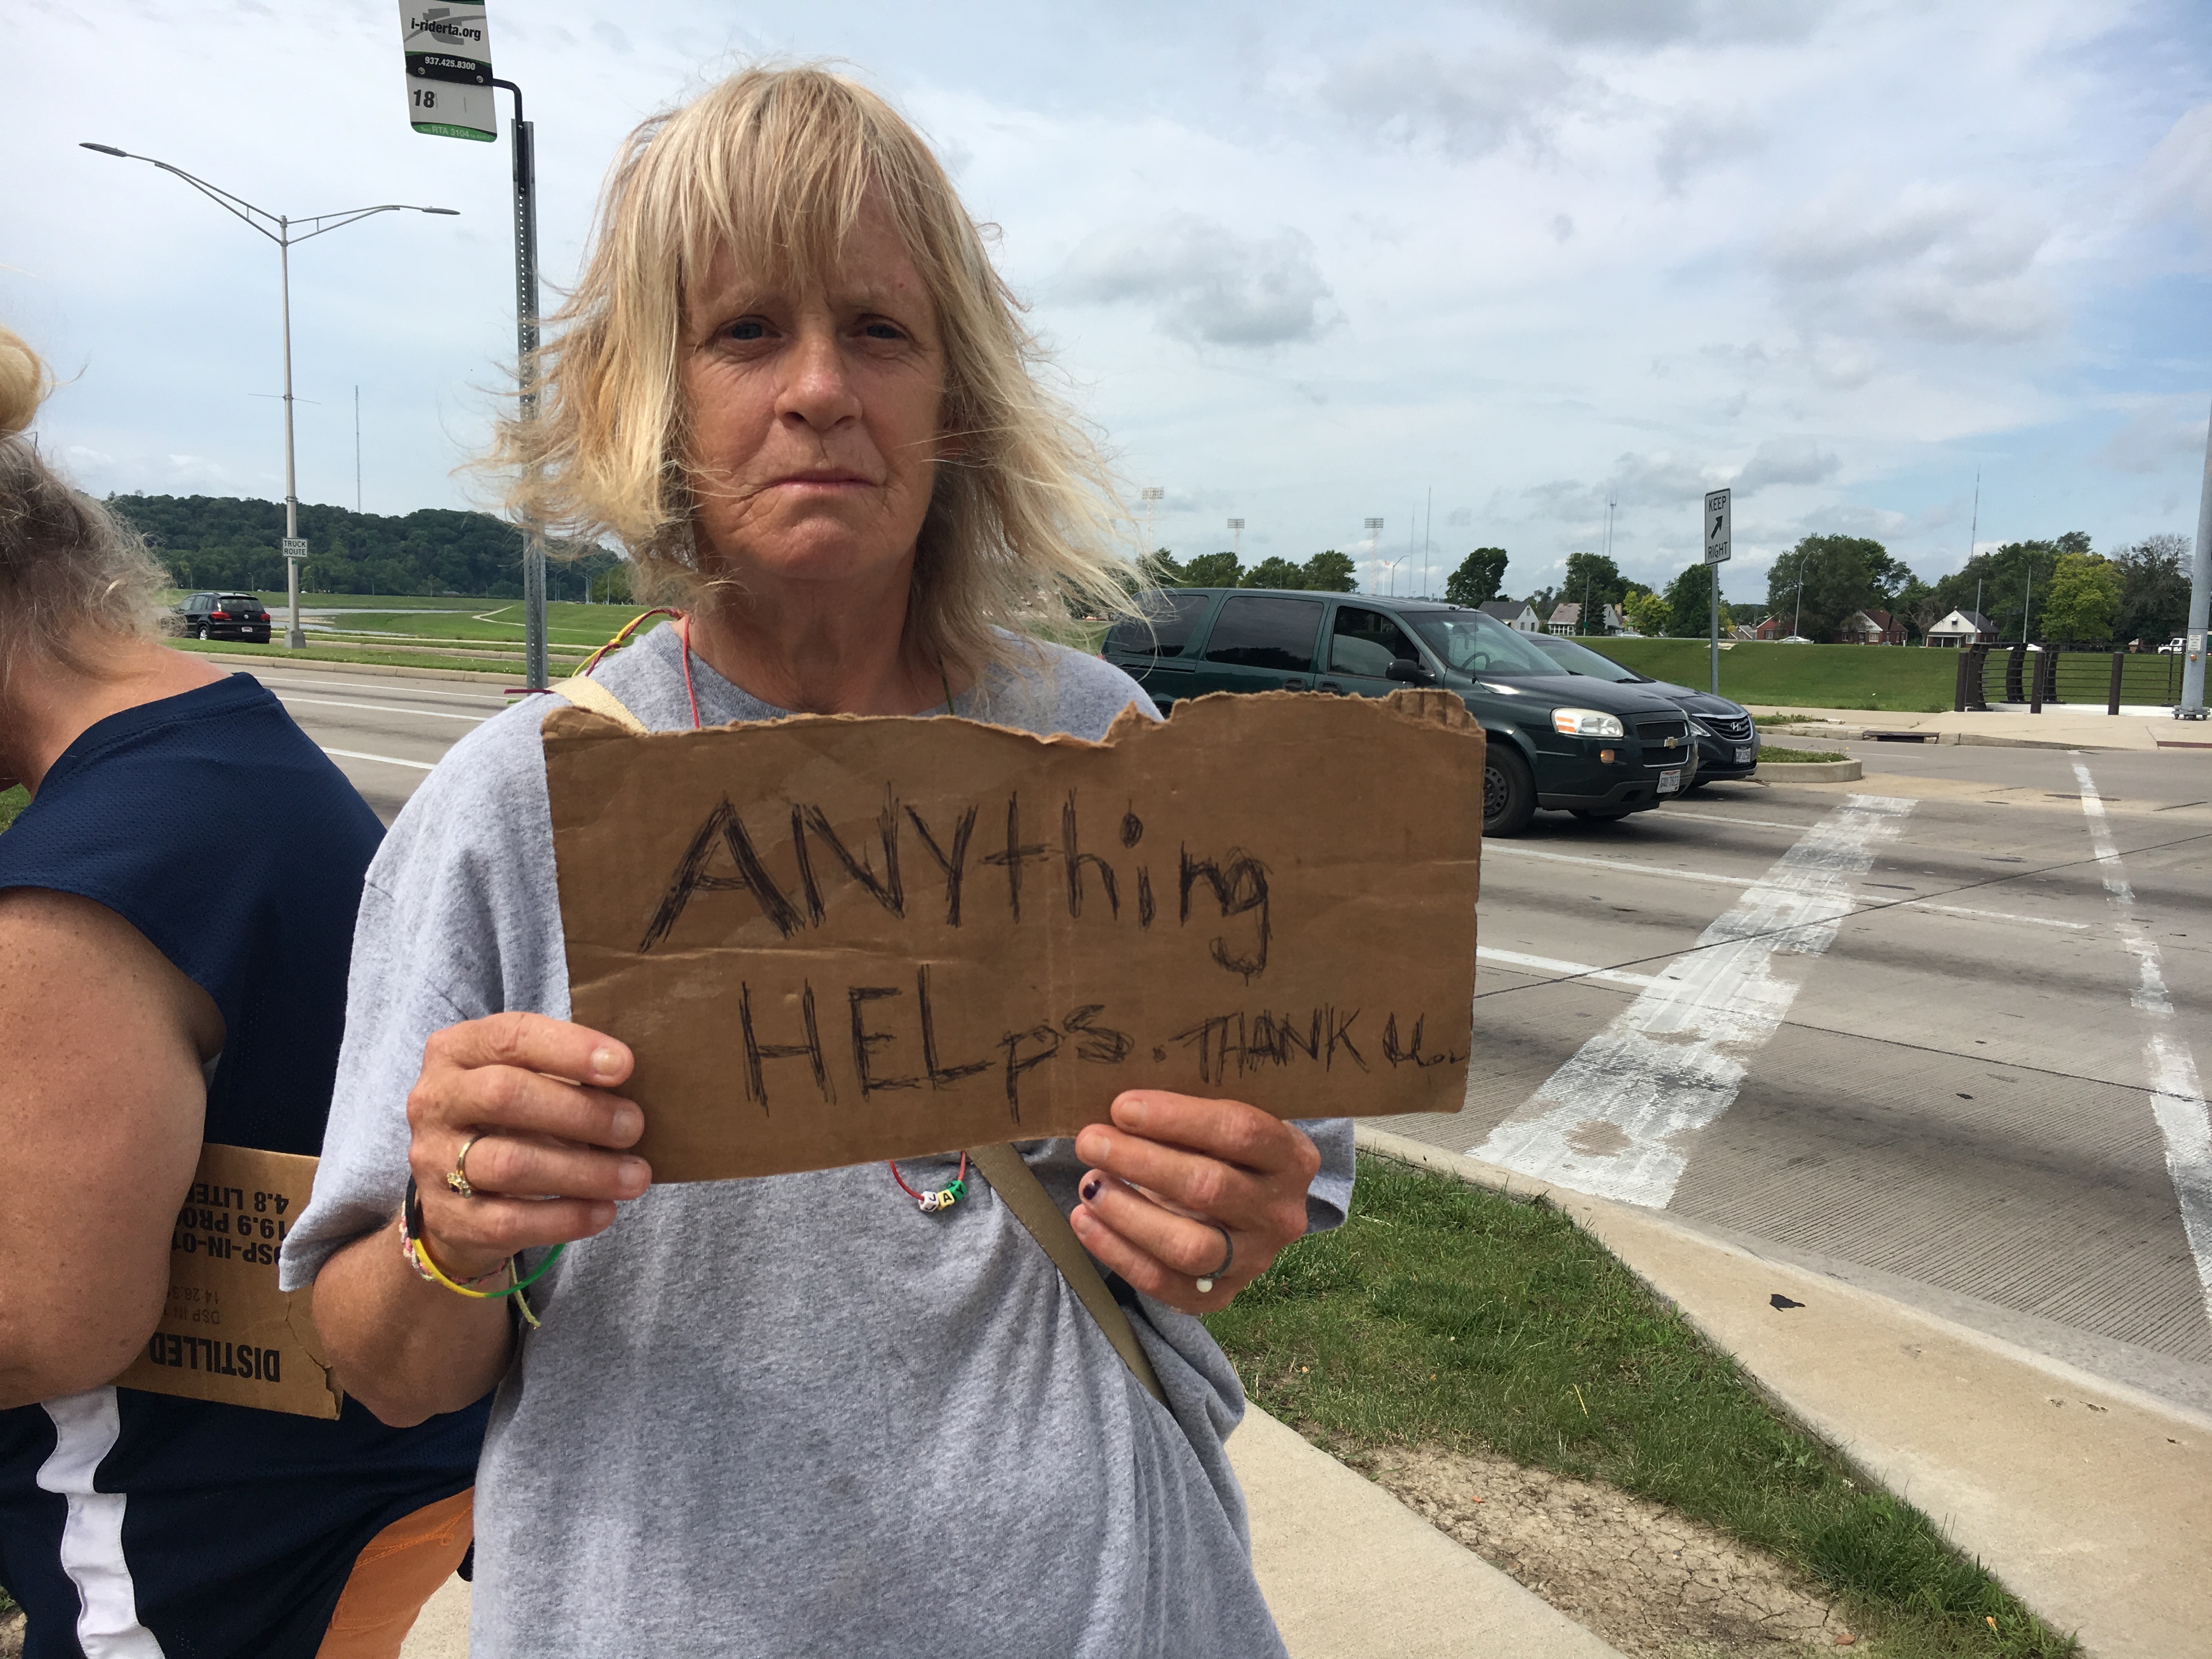 Reporter 7 things I learned hanging out with Dayton panhandlers